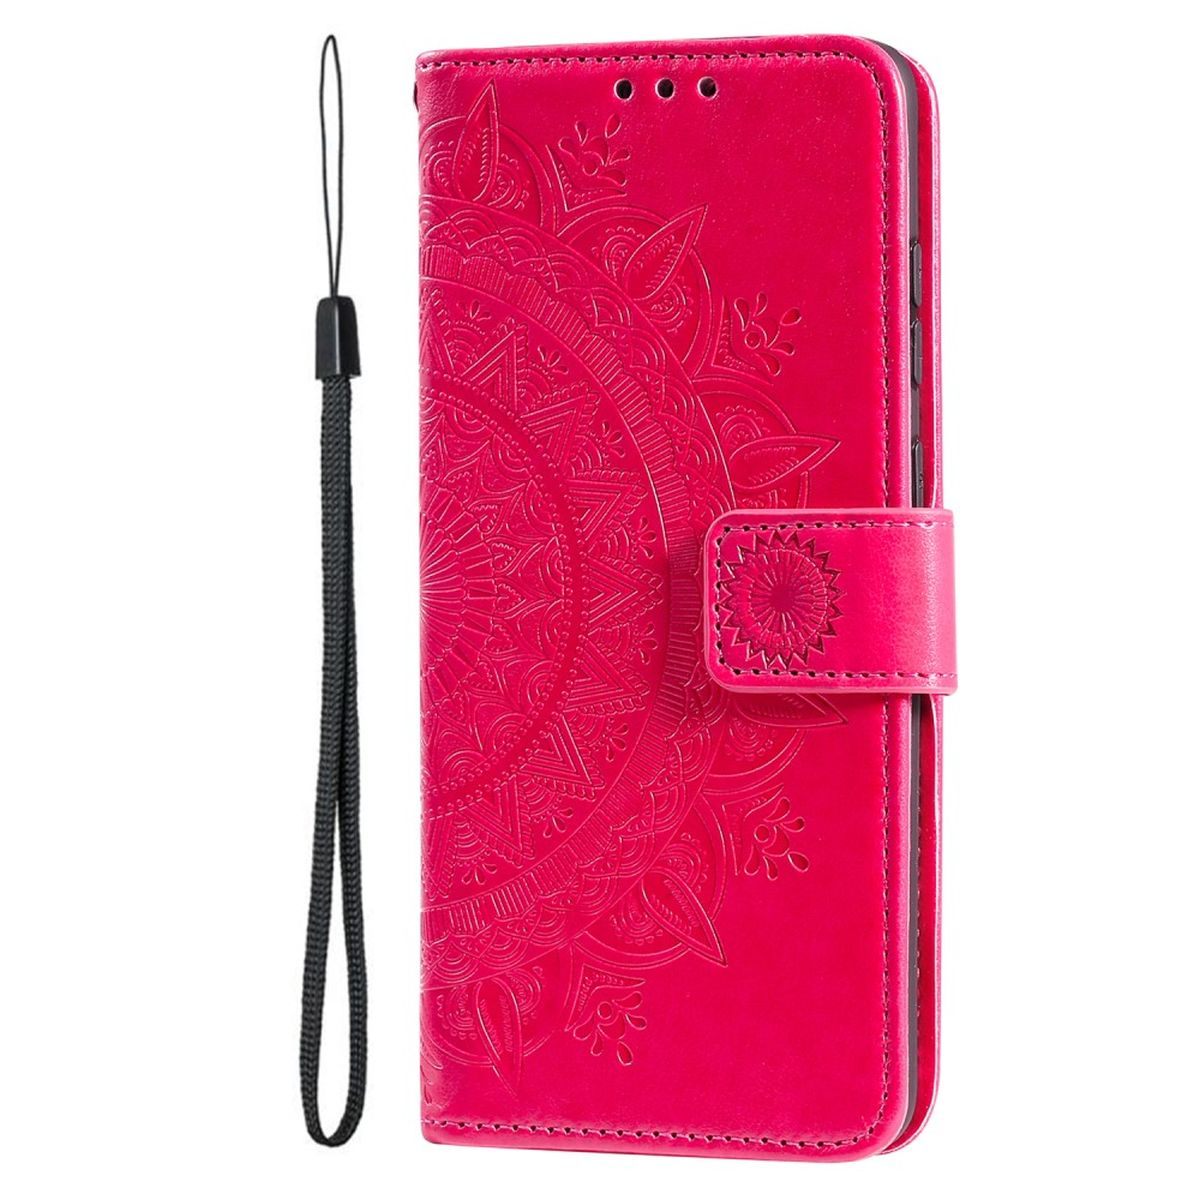 Pro Bookcover, COVERKINGZ Klapphülle OnePlus, 10 5G, Mandala Muster, mit Pink